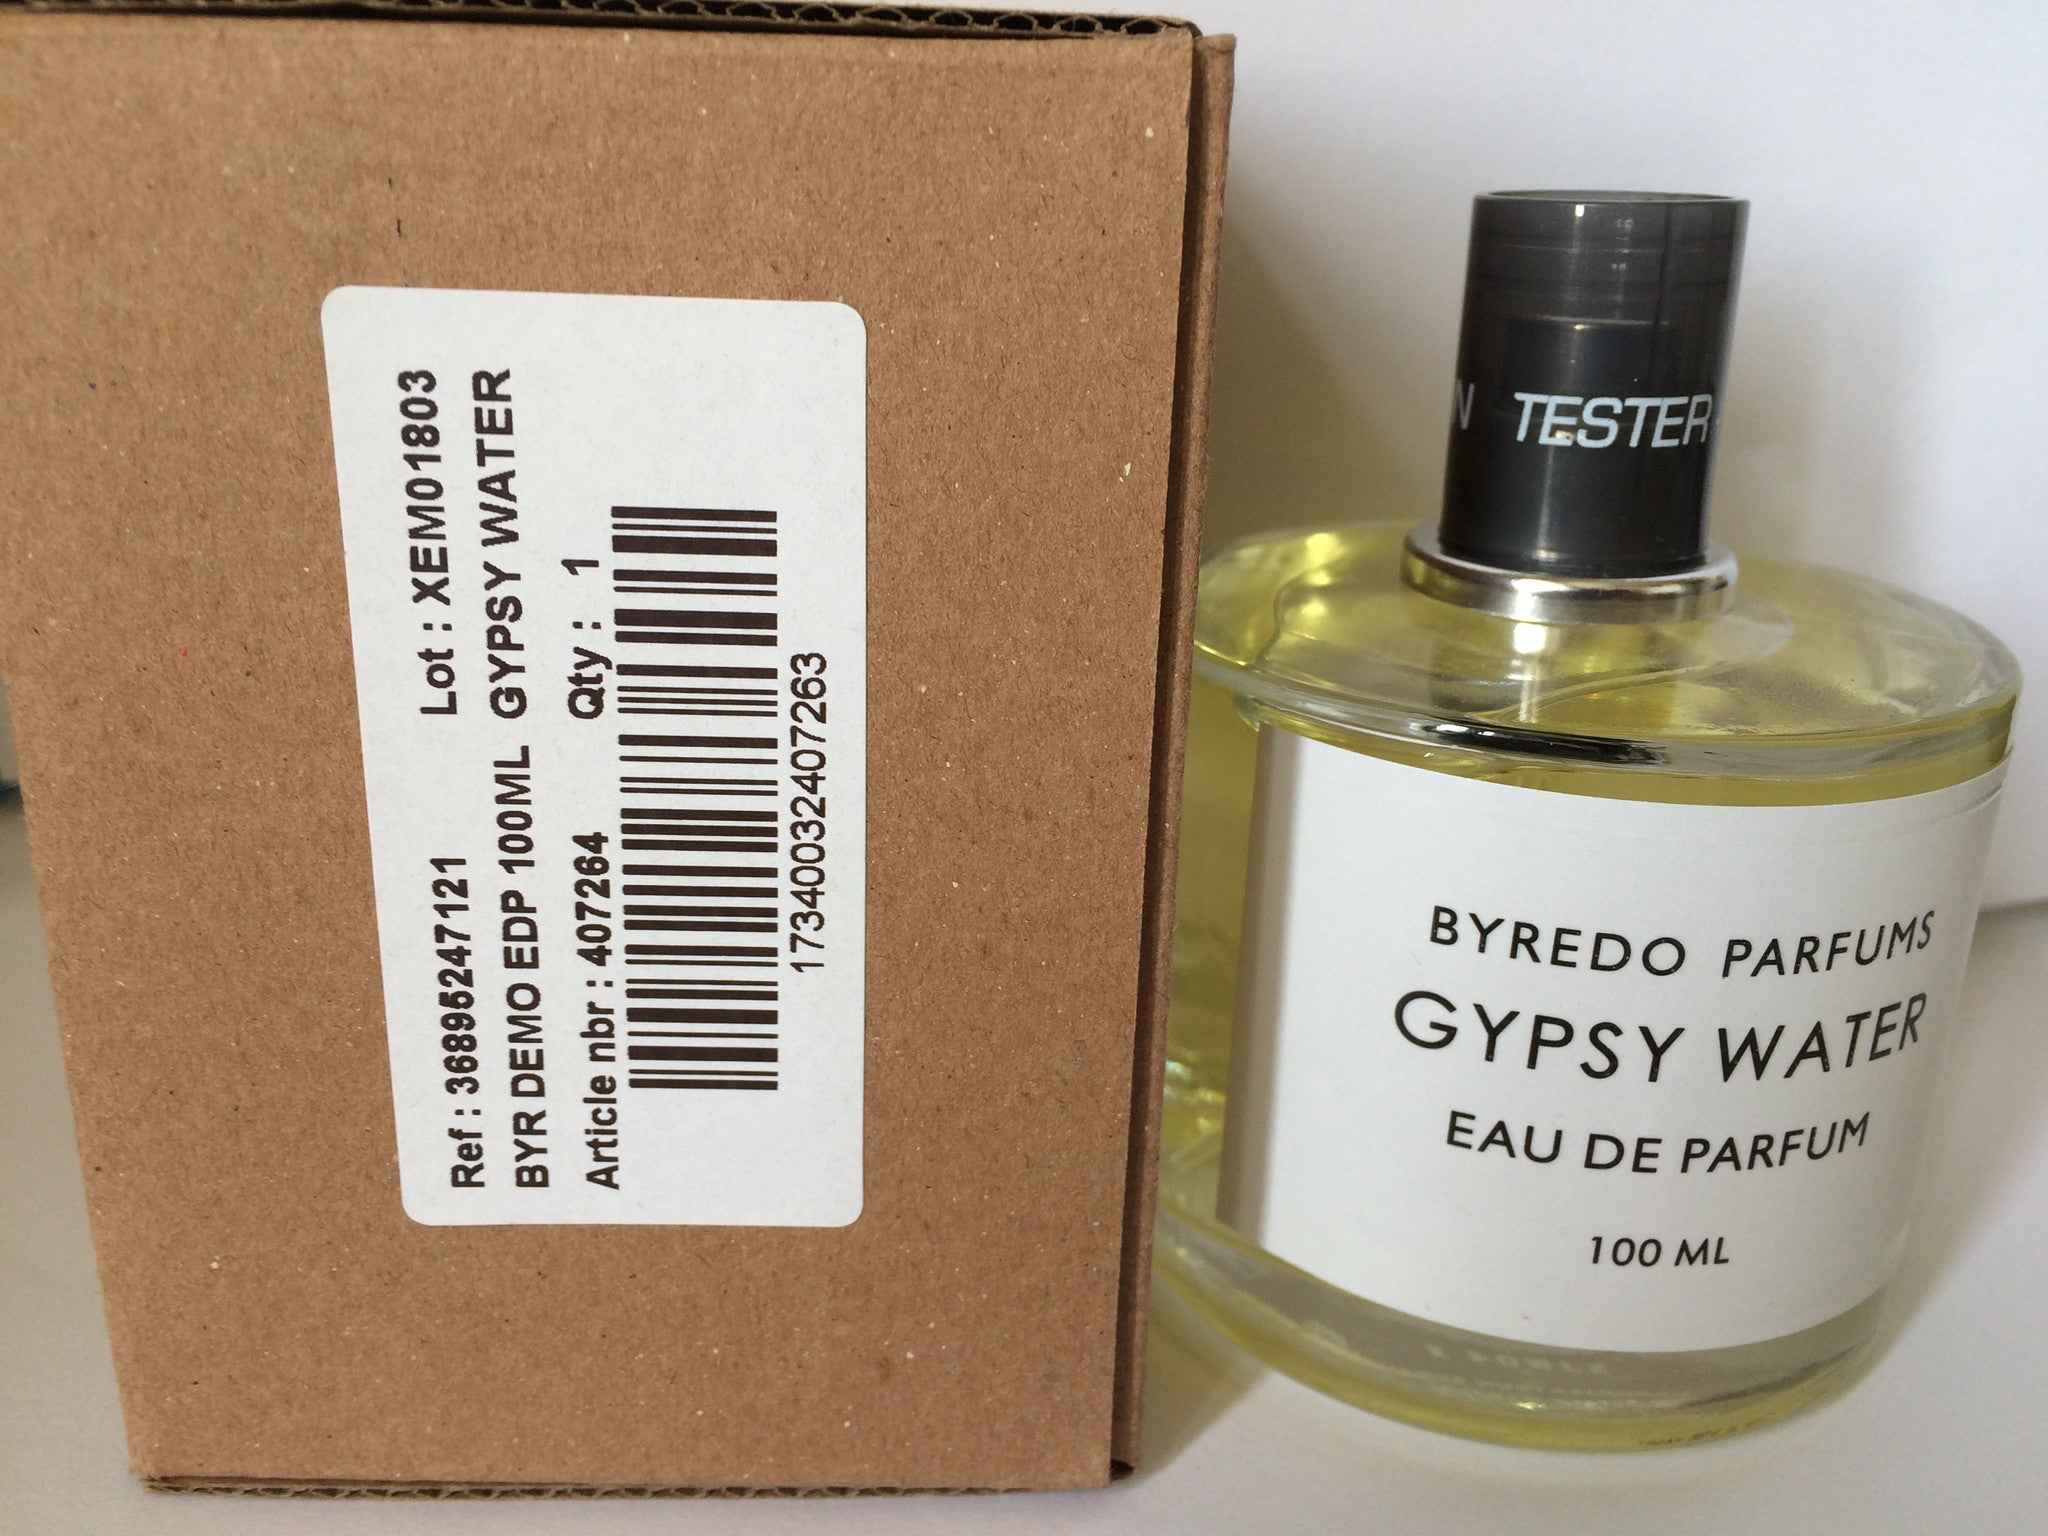 Byredo Gypsy Water Perfume and Fragrances for Women for Sale